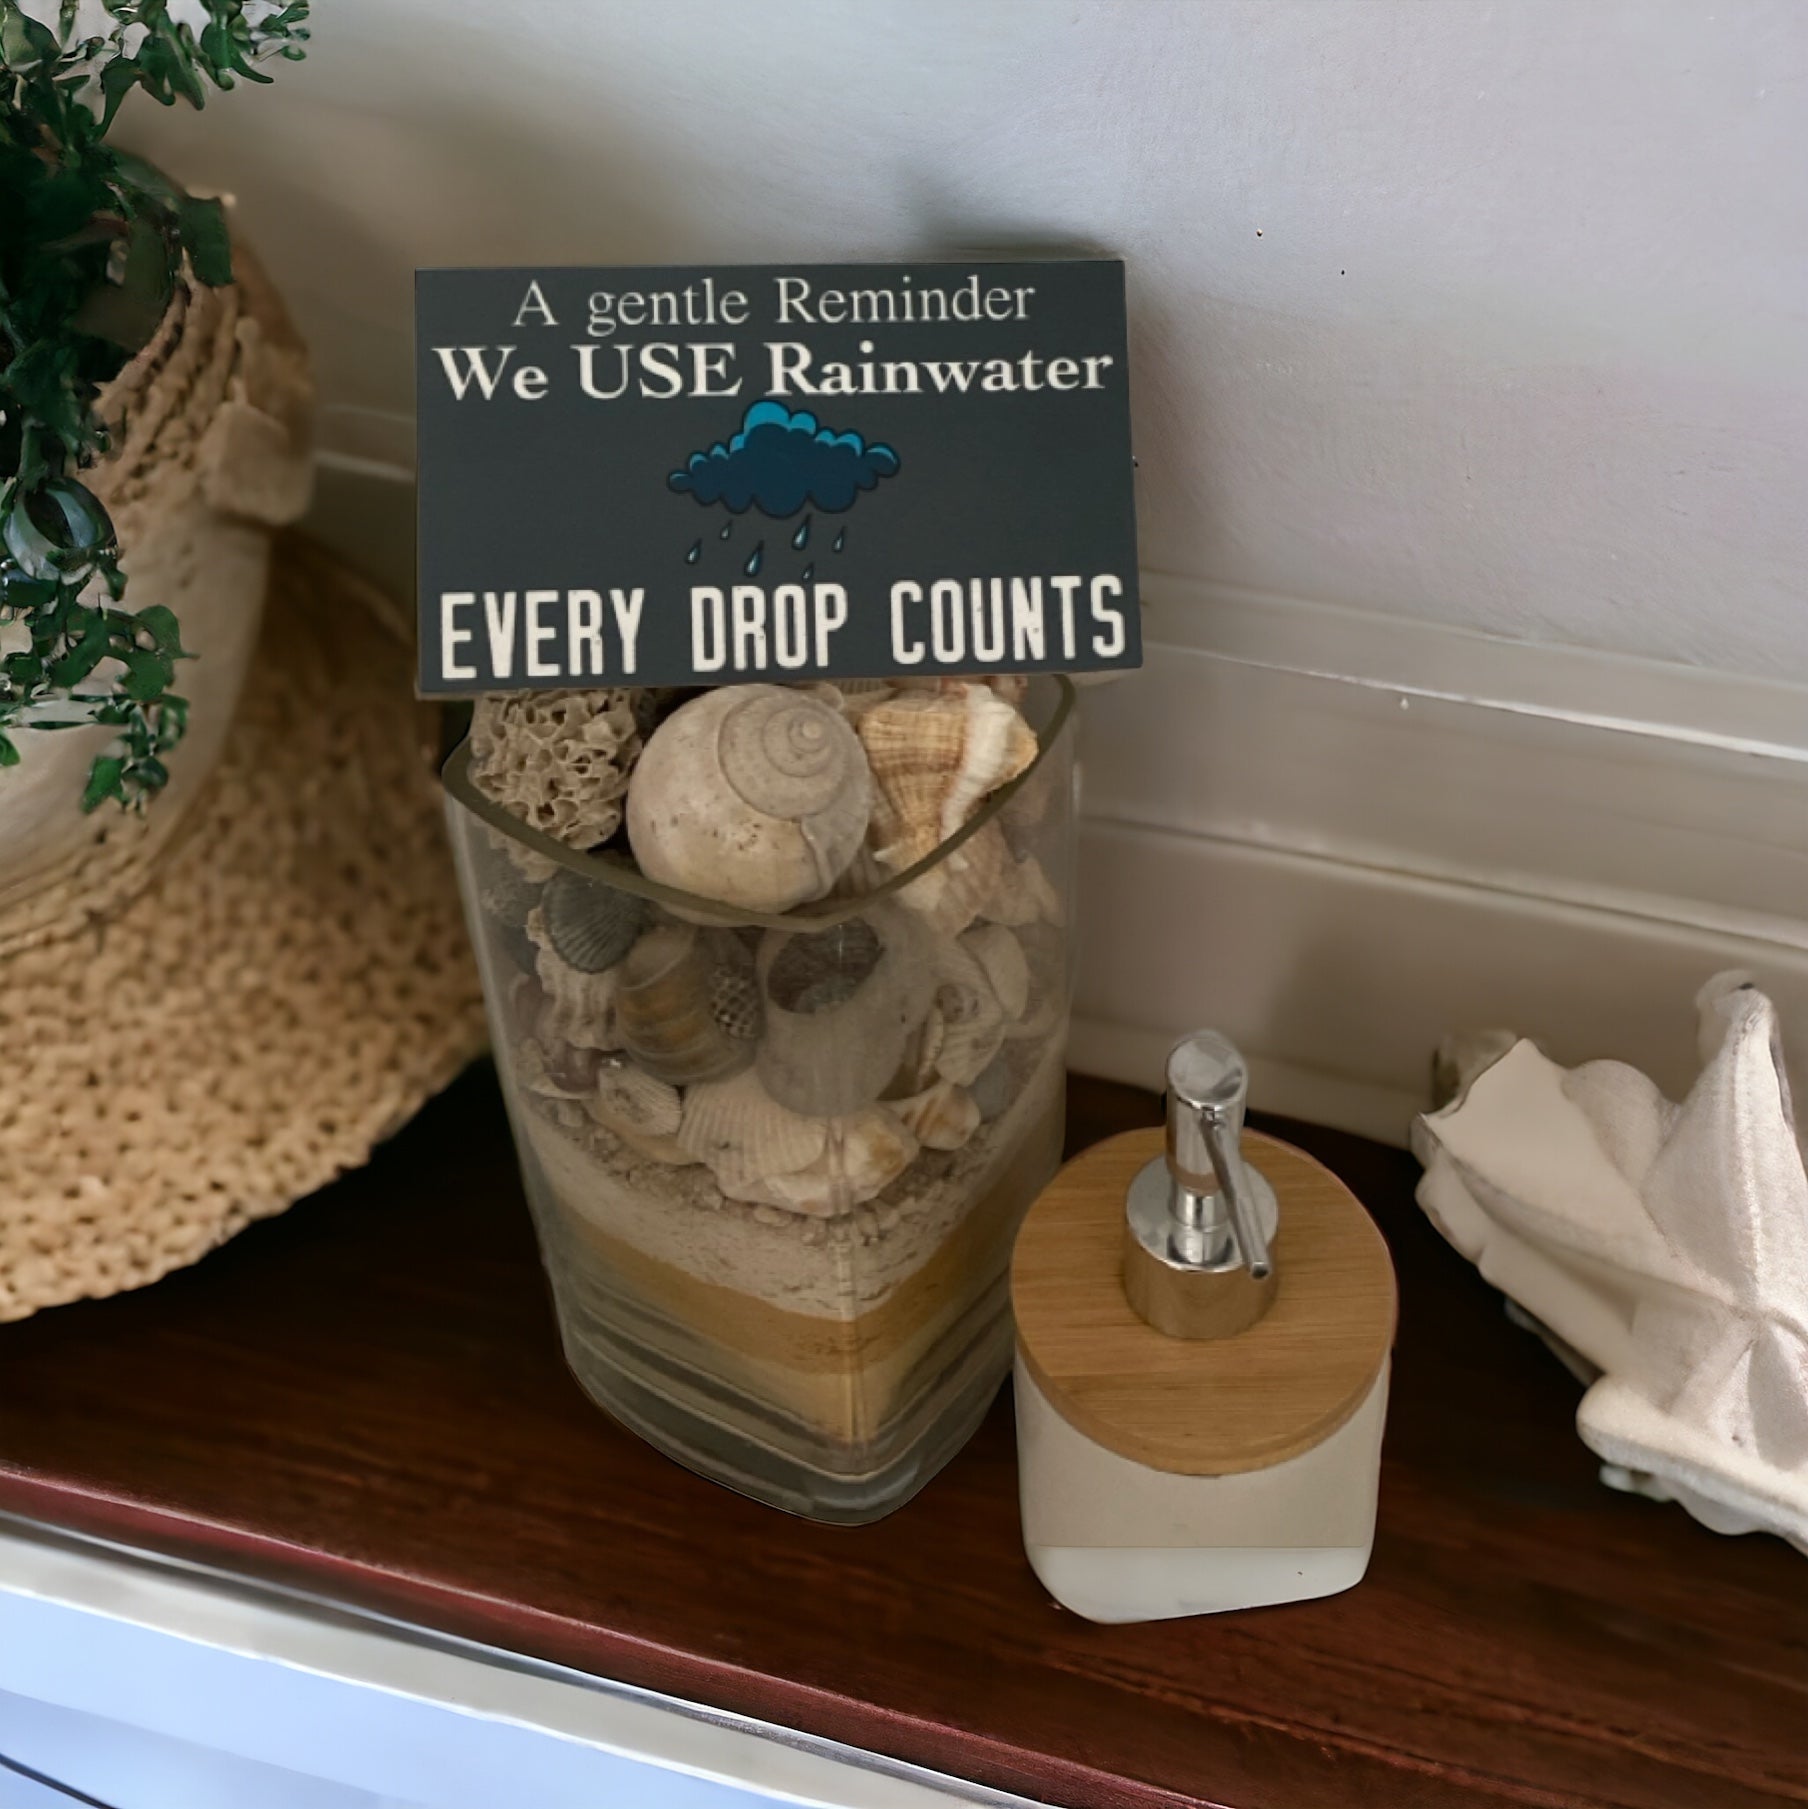 Rainwater In Use Every Drop Counts Eco Water Tank Sign - The Renmy Store Homewares & Gifts 